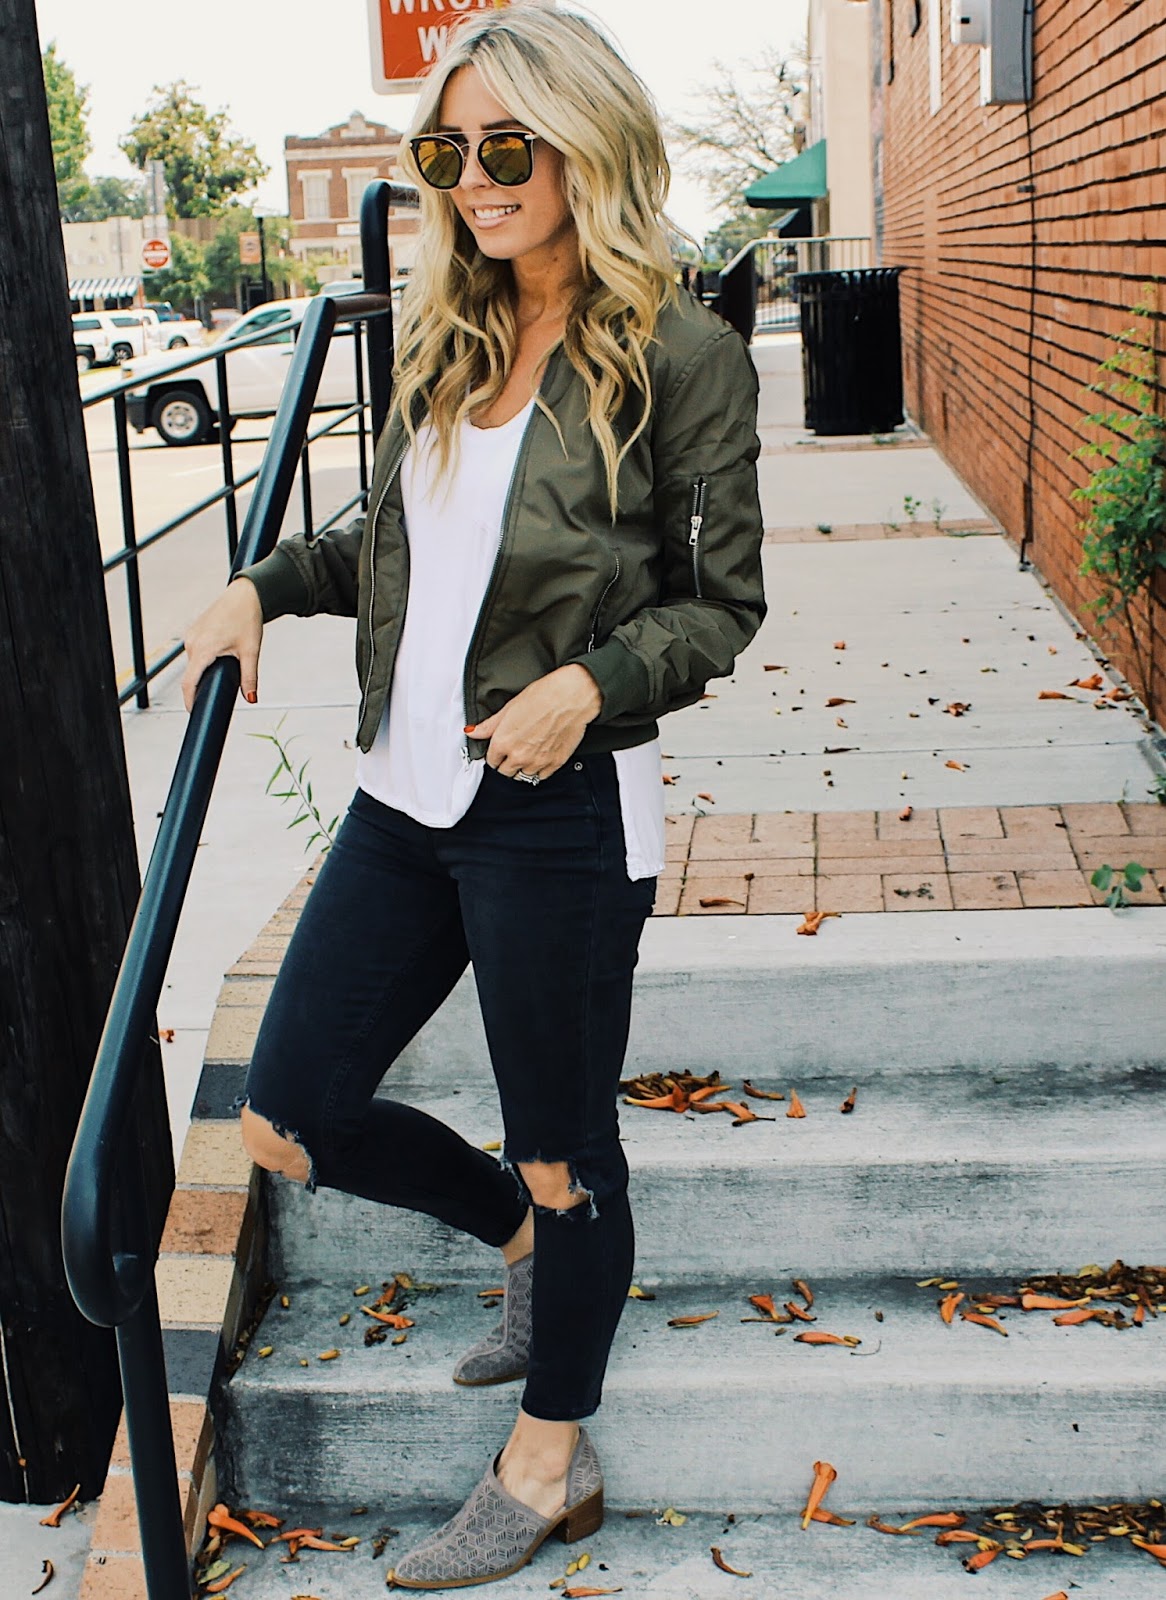 The Sue Style File: 38 Ways to Style Black Jeans for Fall